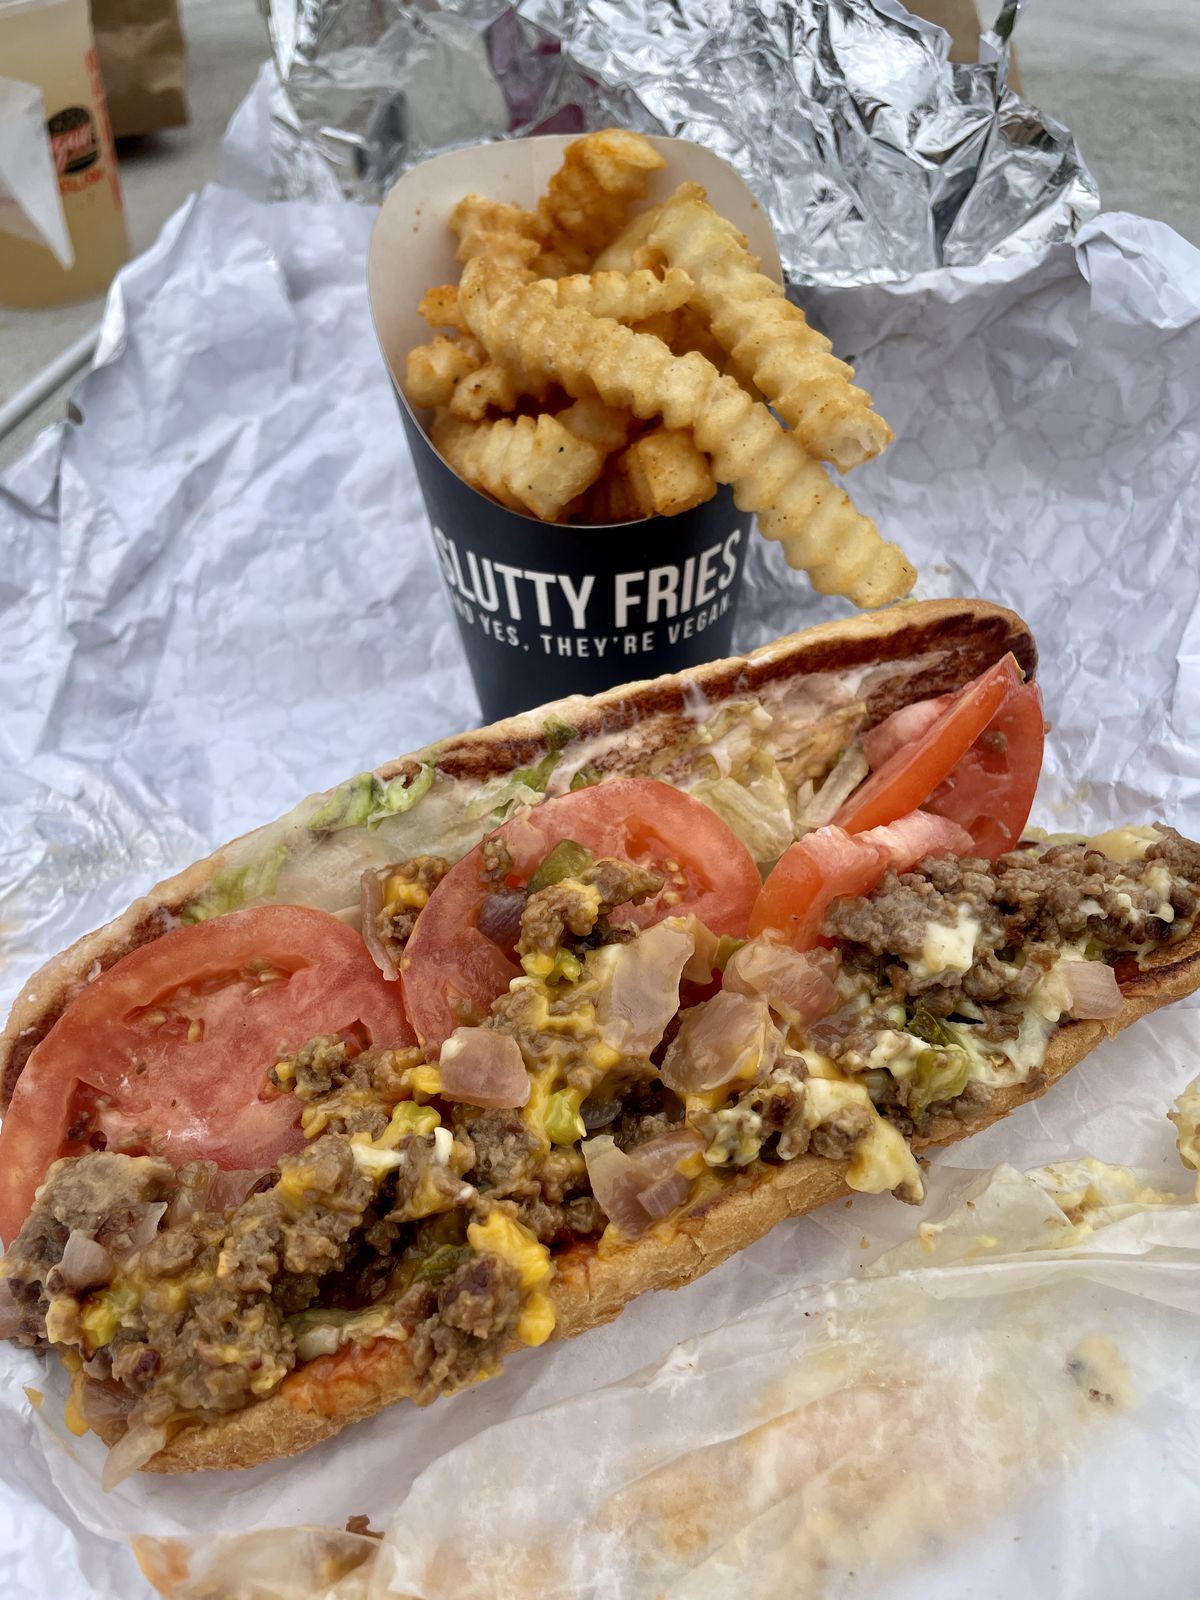 hoagie sitting on tinfoil.  It is filled with ground beef, some melted cheese, chopped cheese, tomato and lettuce.